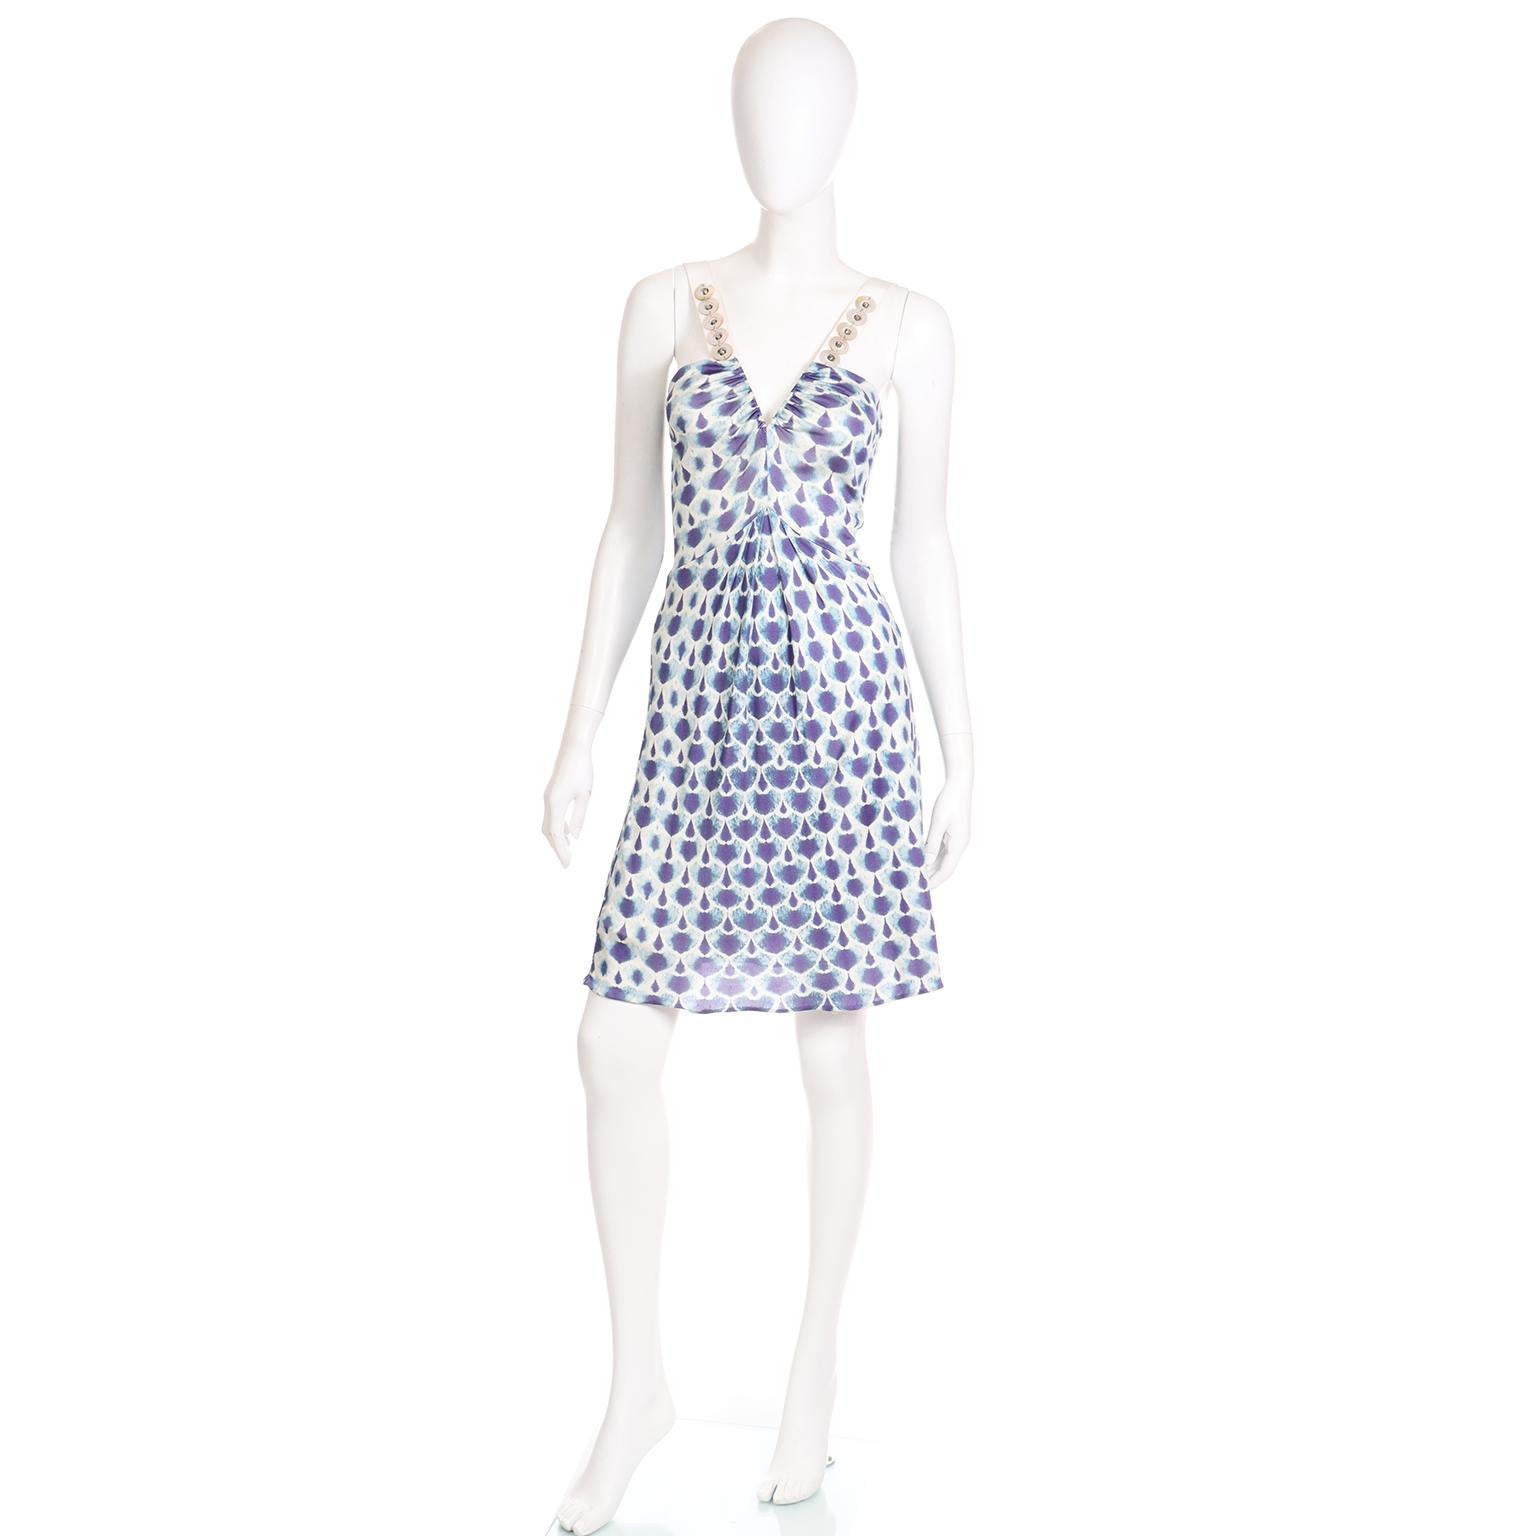 This pretty Alberta Ferretti early 2000's dress would be perfect to take on that summer vacation! The dress slips overhead and has a low V front with gathered bust. The rayon jersey abstract print is in shades of blue, ivory and purple. We love the